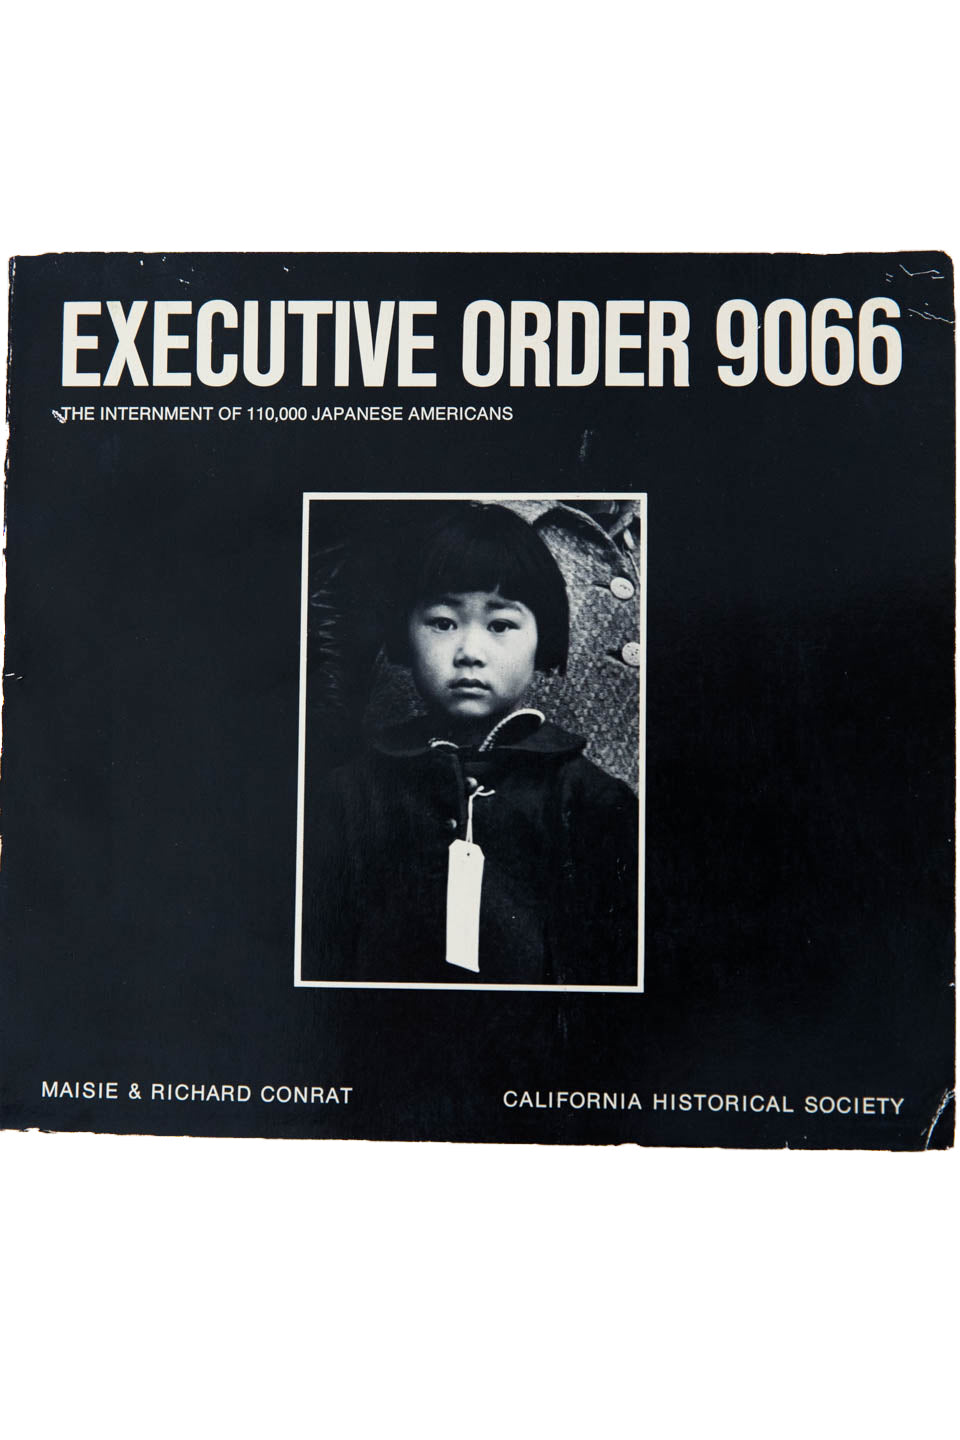 EXECUTIVE ORDER 9066 | The Internment 0f 110,000 Japanese Americans